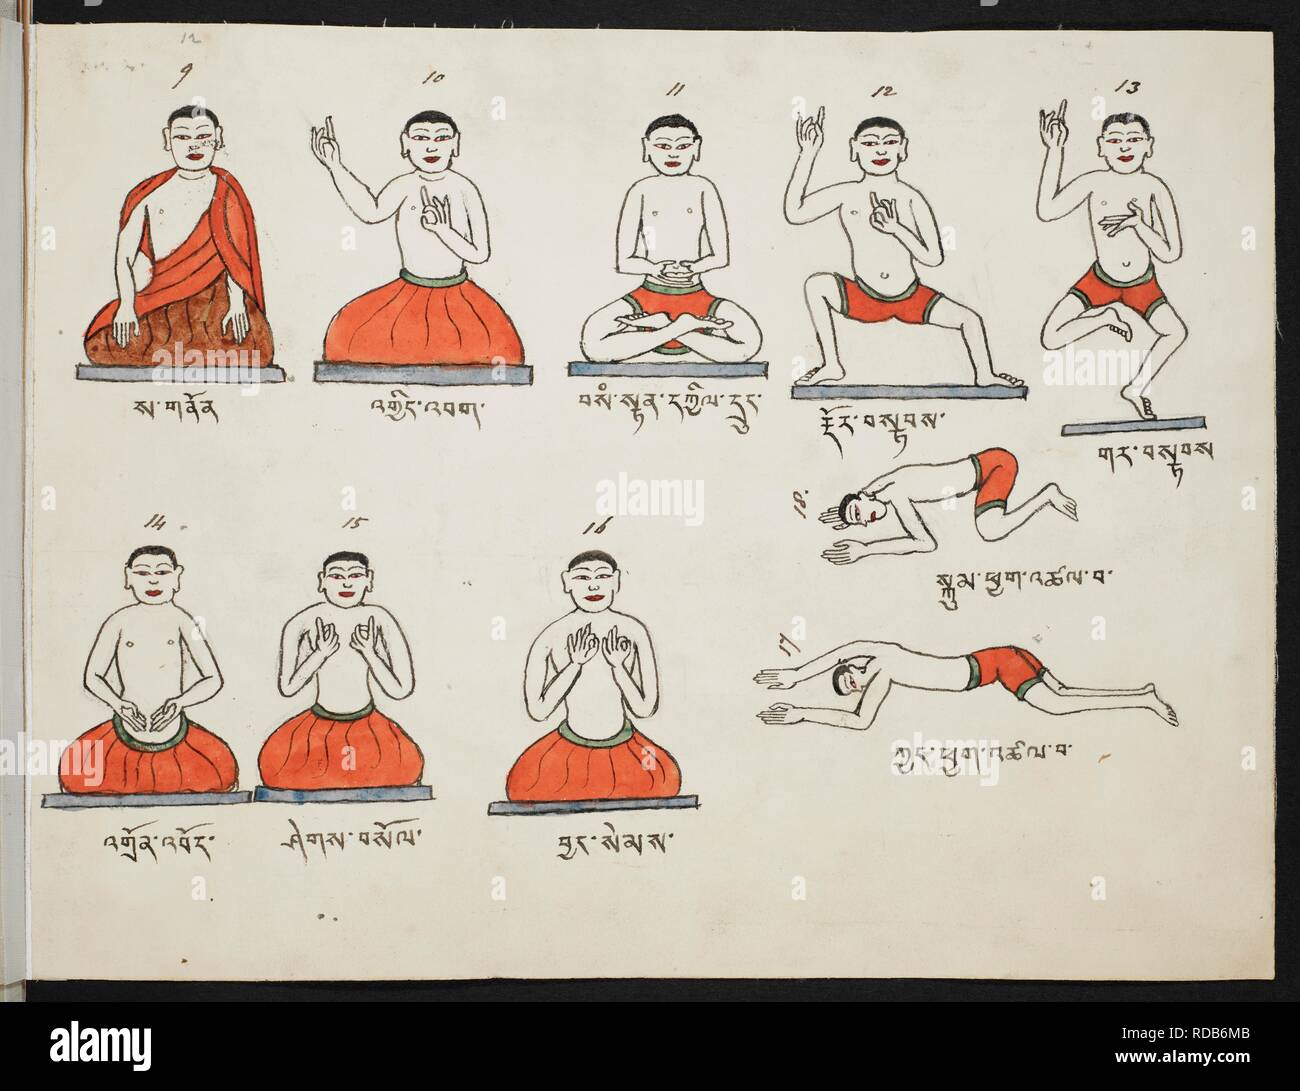 Mudras. â€˜9. Sagnonâ€™ [sa-gnon]â€™ position of repose assumed by Shakya when he had freed the world from evil spirits.â€™ â€˜So far applies to Shakya: the others are position of Deotasâ€™ â€˜10. Gingbagâ€™ [hgyin-hbag]â€™ the name of hands in this position.â€™ â€˜11. Sumtenkiltongâ€™ [bsam-stan-dkyil-drun] â€˜do. do. and feet.â€™ â€˜12. Dorrtabâ€™ [rdor-bstabs] â€˜do. do.â€™ â€˜13. Gurtabâ€™ [gar-bstabs] â€˜do. do.â€™ â€˜14. Dunbutâ€™ [hgron-hbod] â€˜do. position of Deota supposed to be inviting a supplicant to come.â€™ â€˜15. Sheghsulâ€™ [segs-bsol] â€˜flipping the fingers and saying â€˜go  Stock Photo